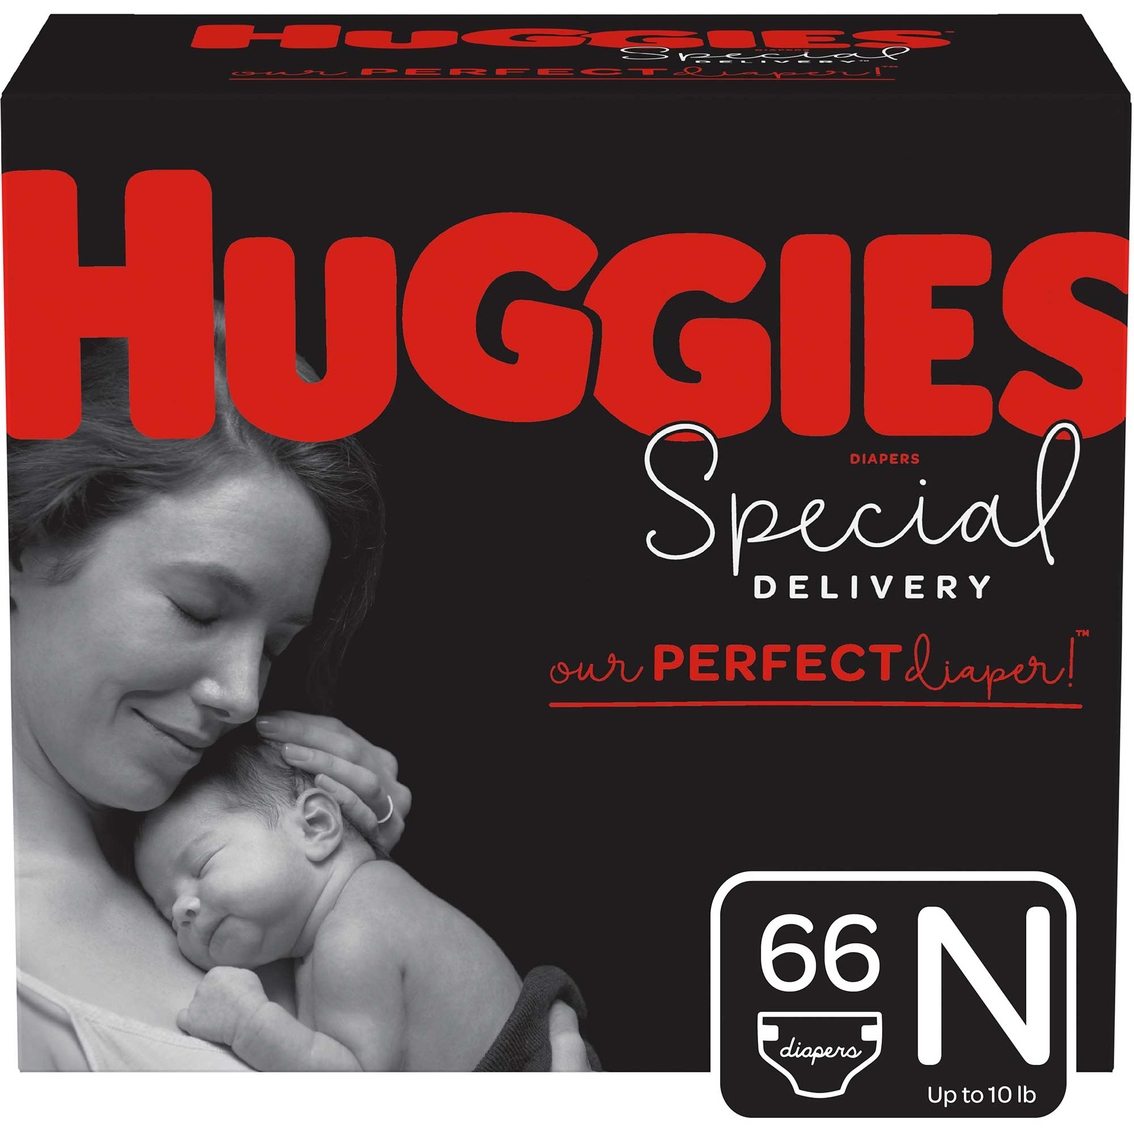 Huggies Newborn Special Delivery Diapers, 66 ct.